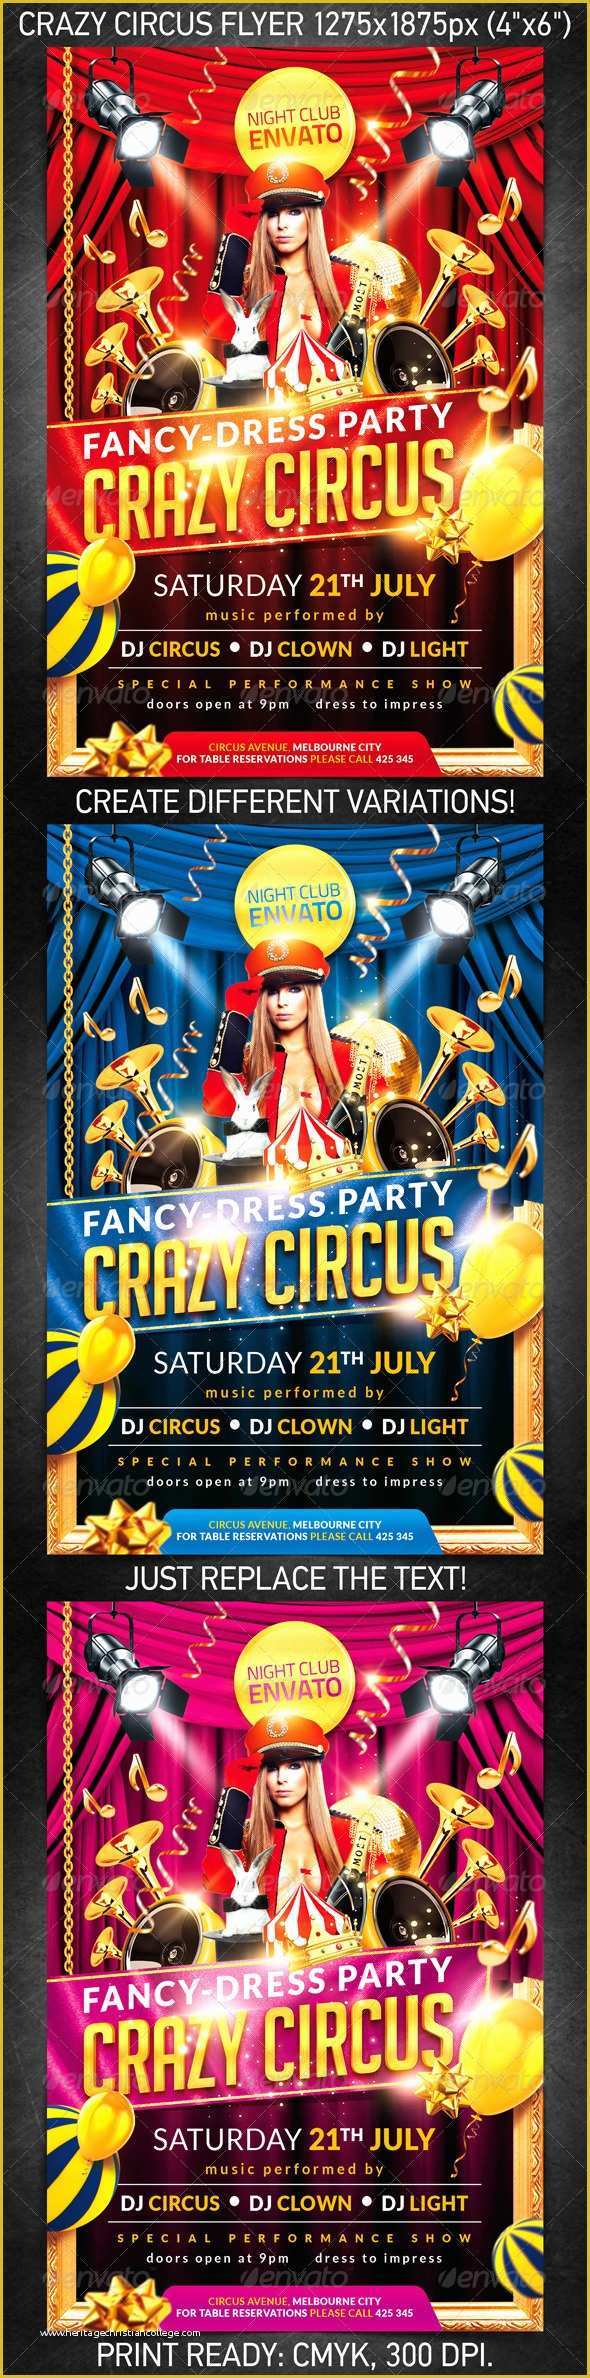  Circus Poster Template Free Download Of Crazy Circus Party Flyer Psd 